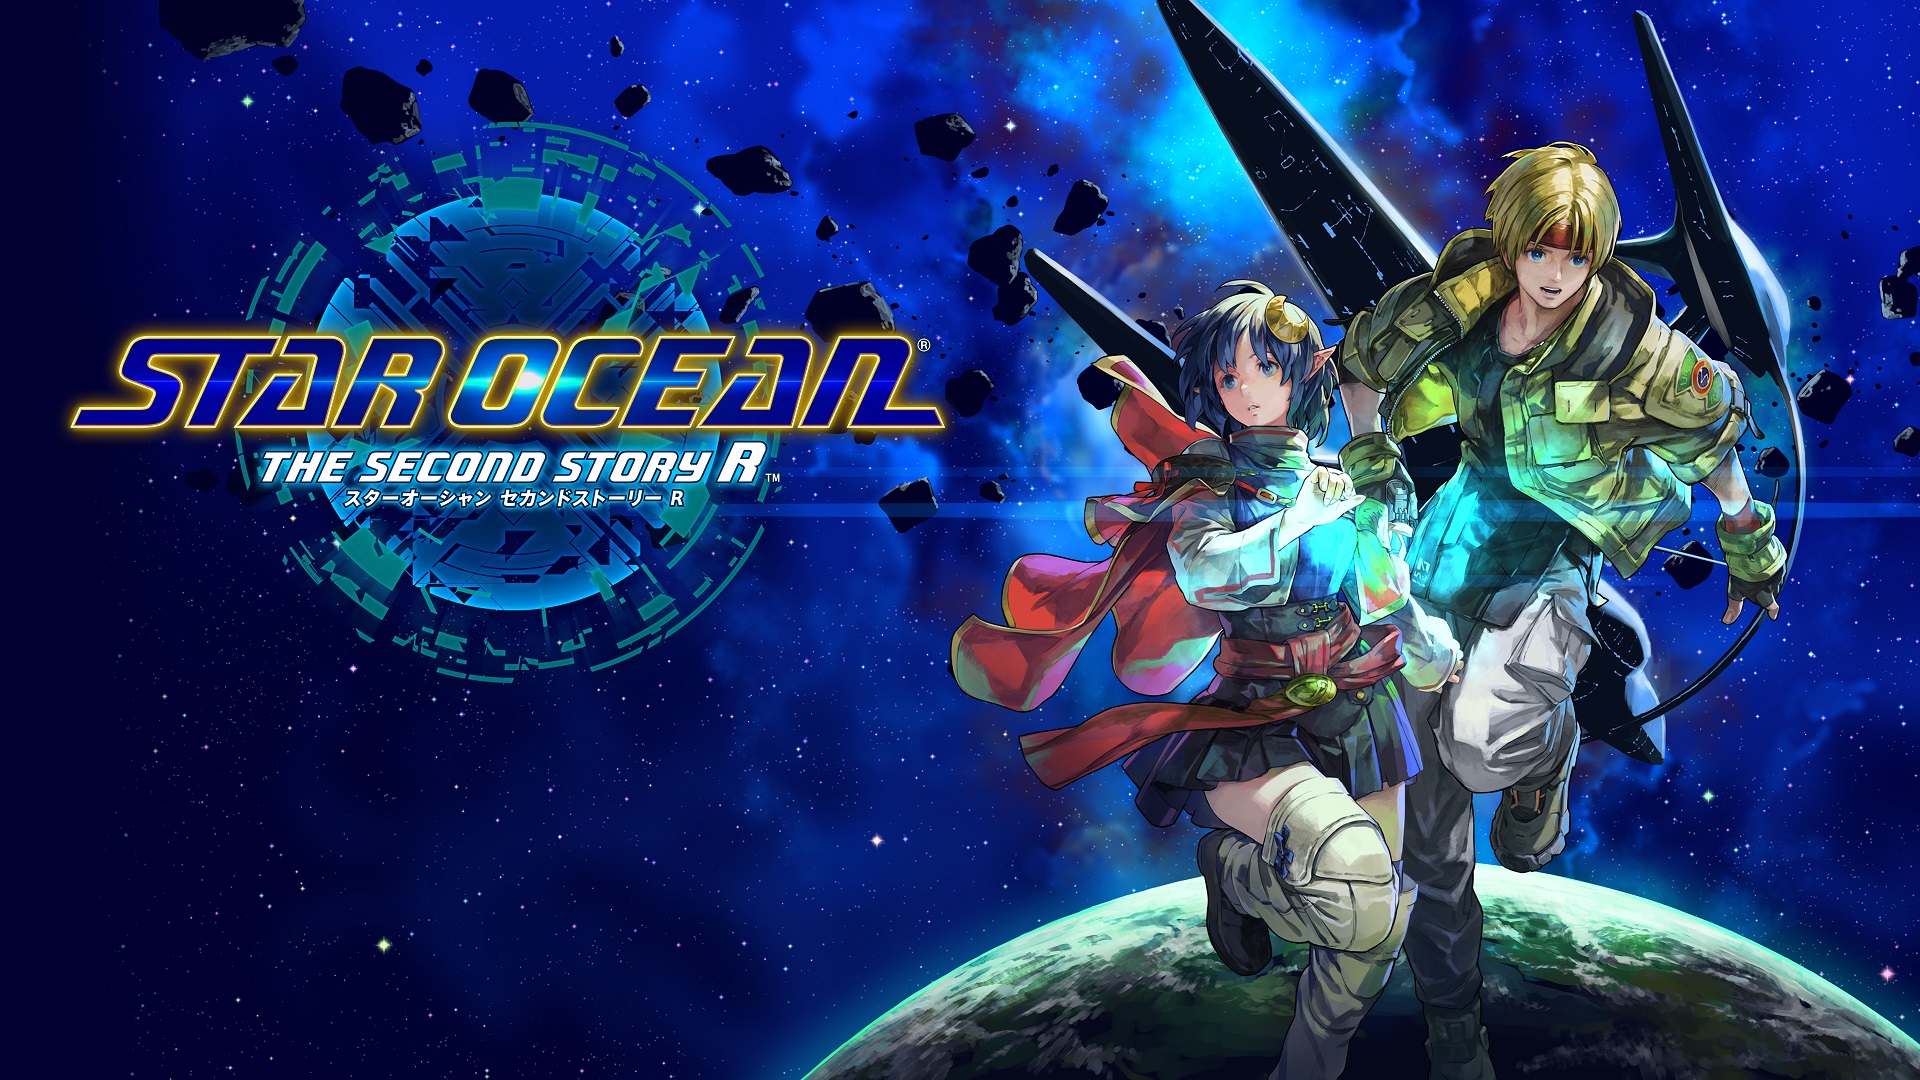 Review: Star Ocean: The Second Story R (Nintendo Switch version)